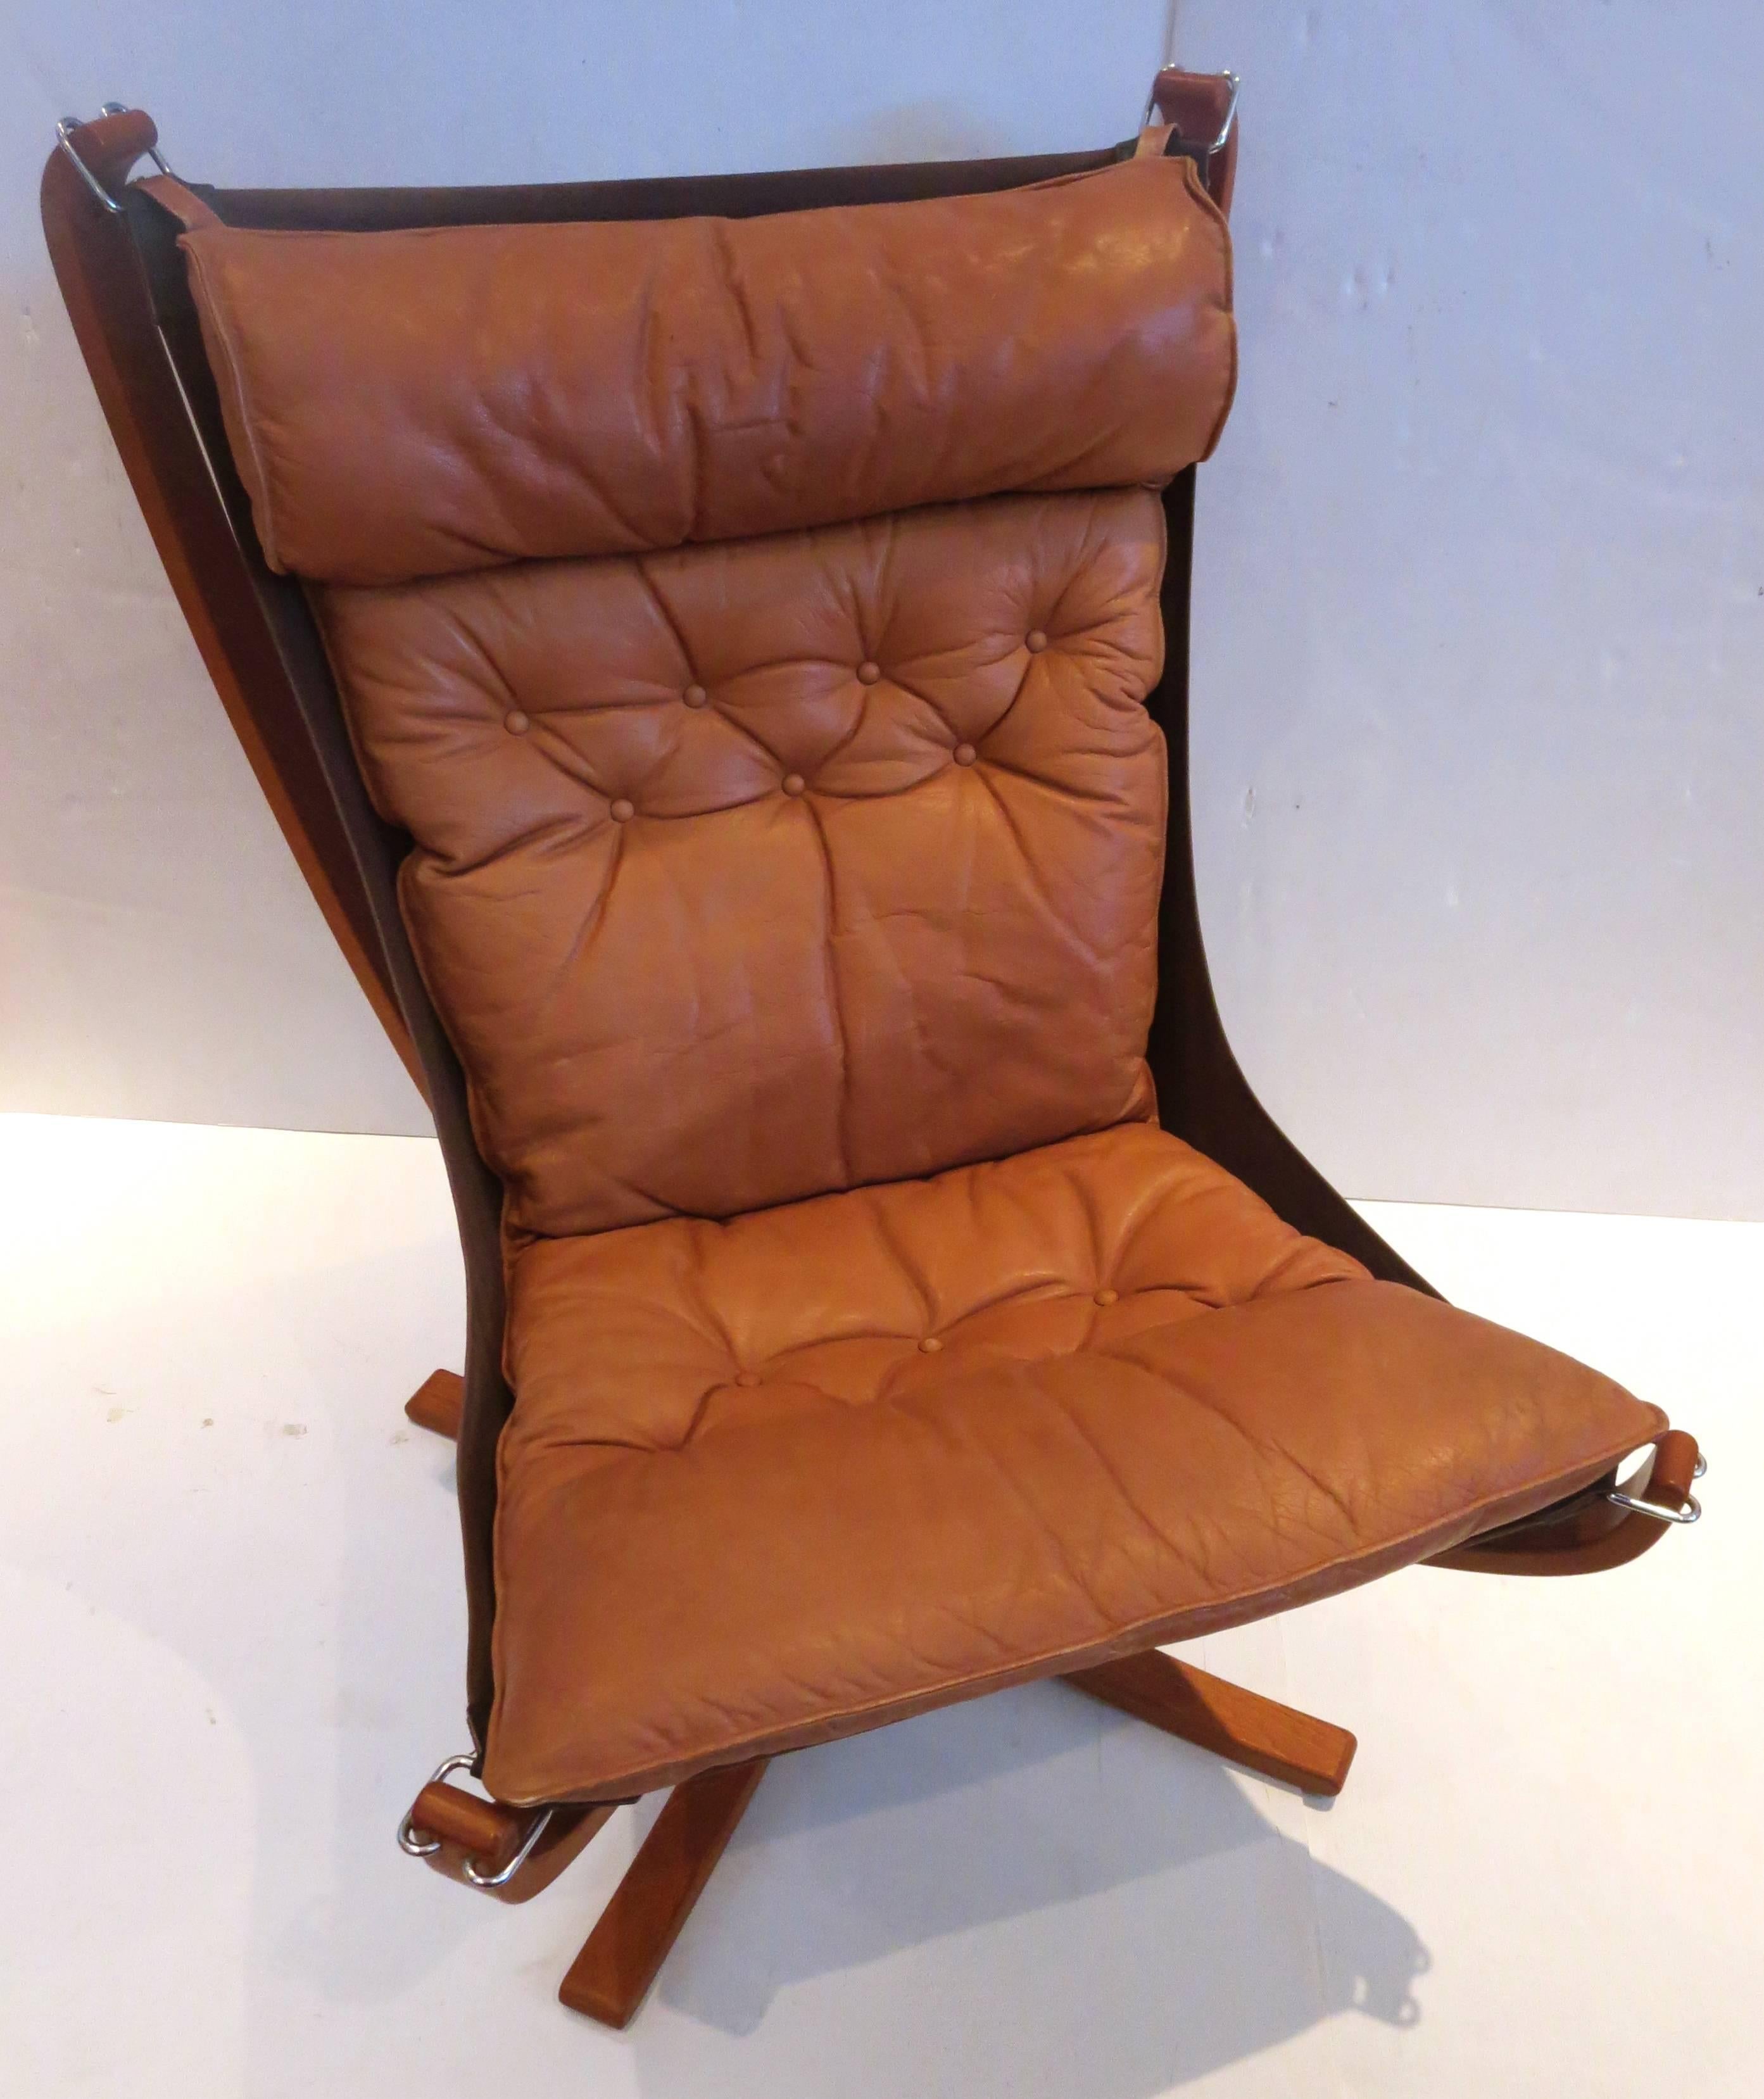 An iconic falcon chair in bentwood teak frame with leather seat cover in cognac color, circa 1970s. Nice and clean condition nicely worn leather no rips or tears, some cracking and worn as shown, solid and sturdy designed by Sigurd Russell for Vatne